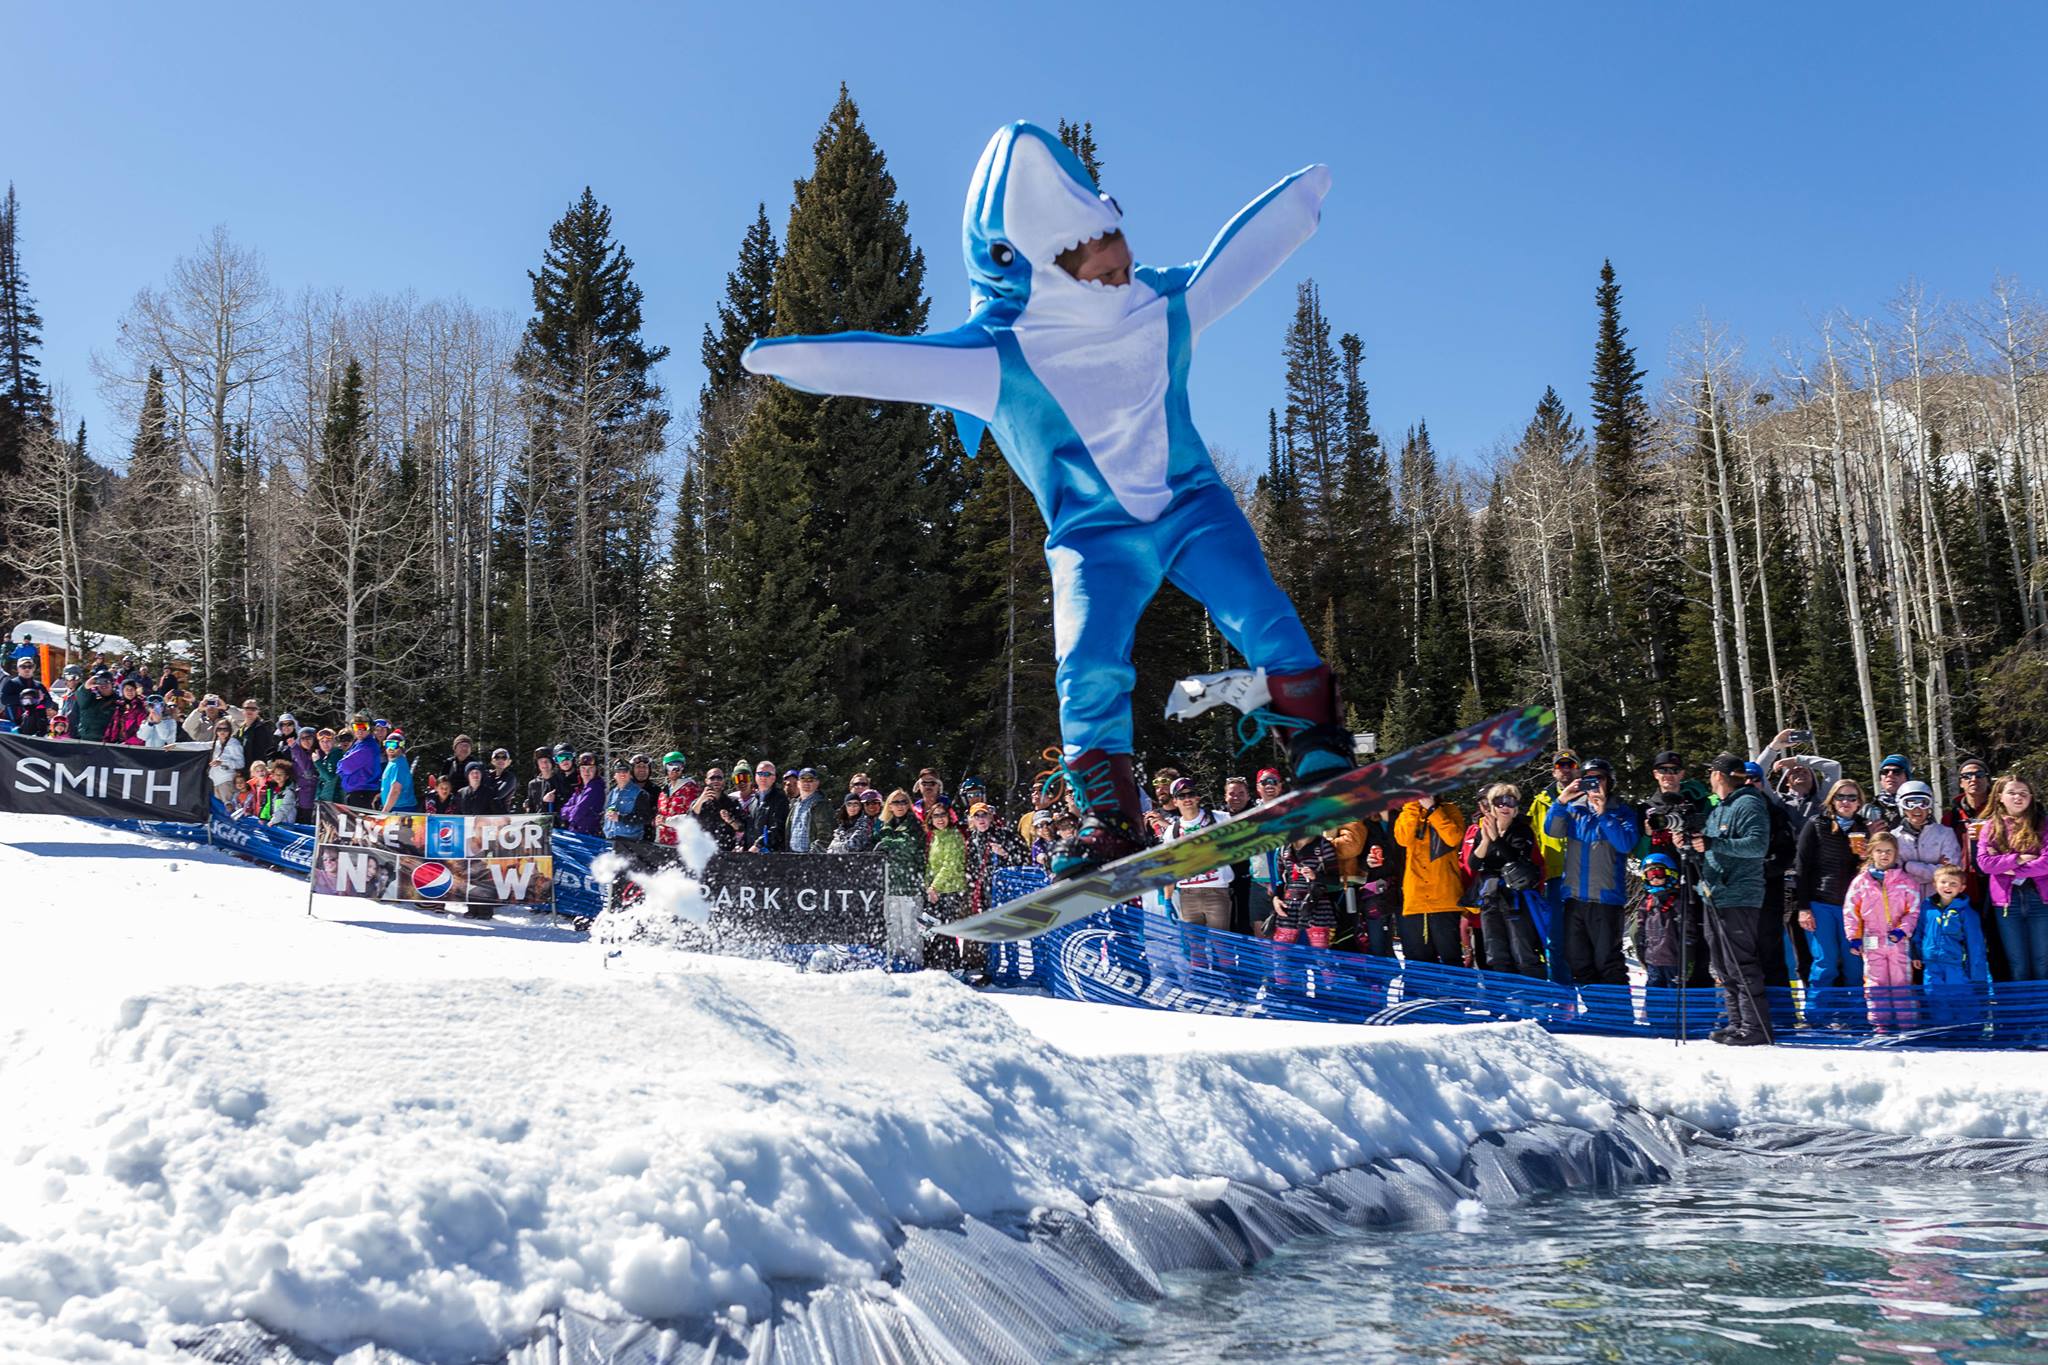 Pond skimming competition in Park City, Utah